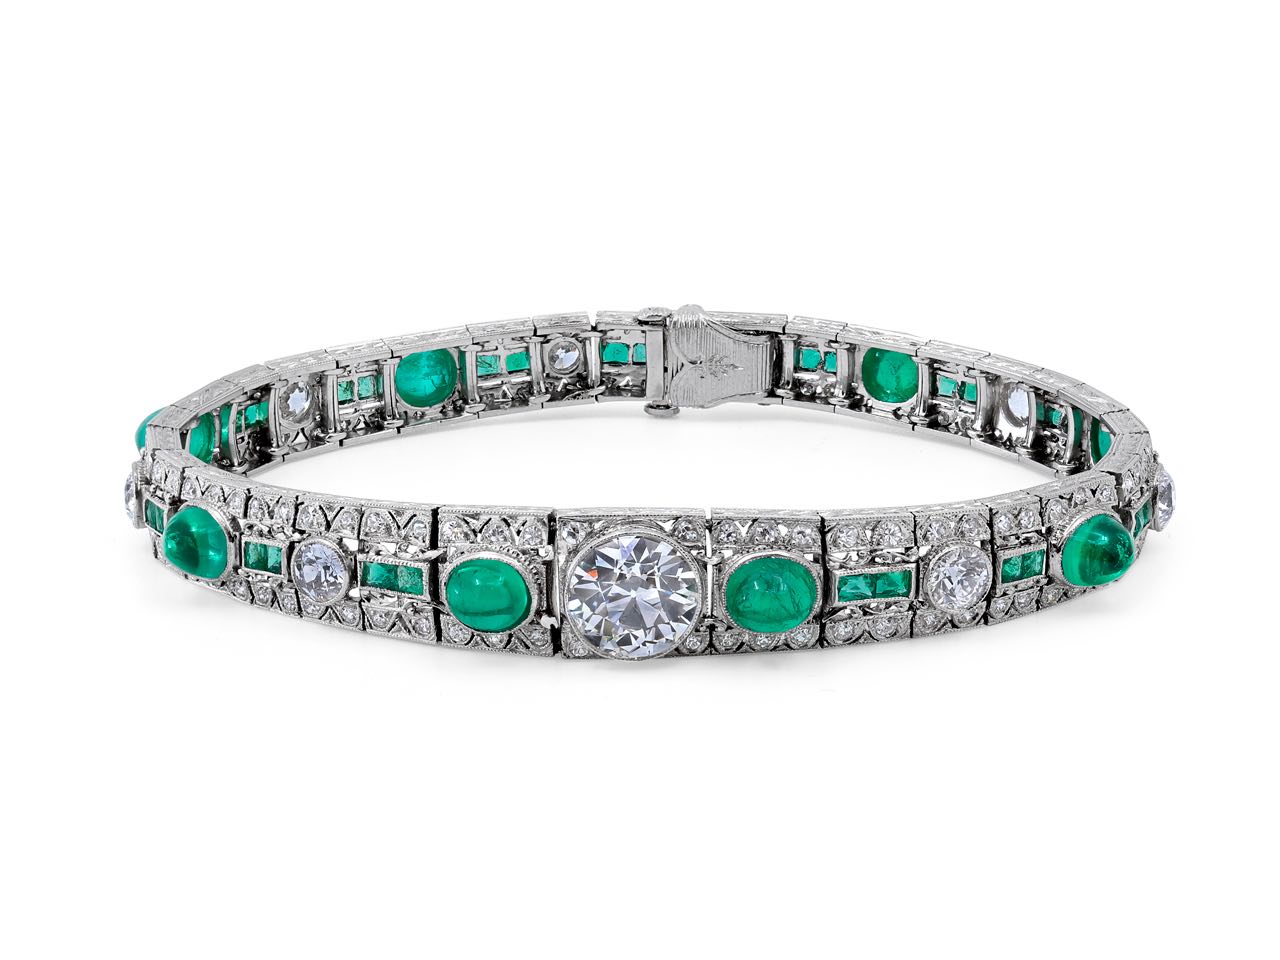 Beautiful cabochon cut emerald bracelet designed to stand out from the  rest. Diamond detailing aroun… | Bridal diamond jewellery, Emerald bracelet,  Bracelet designs